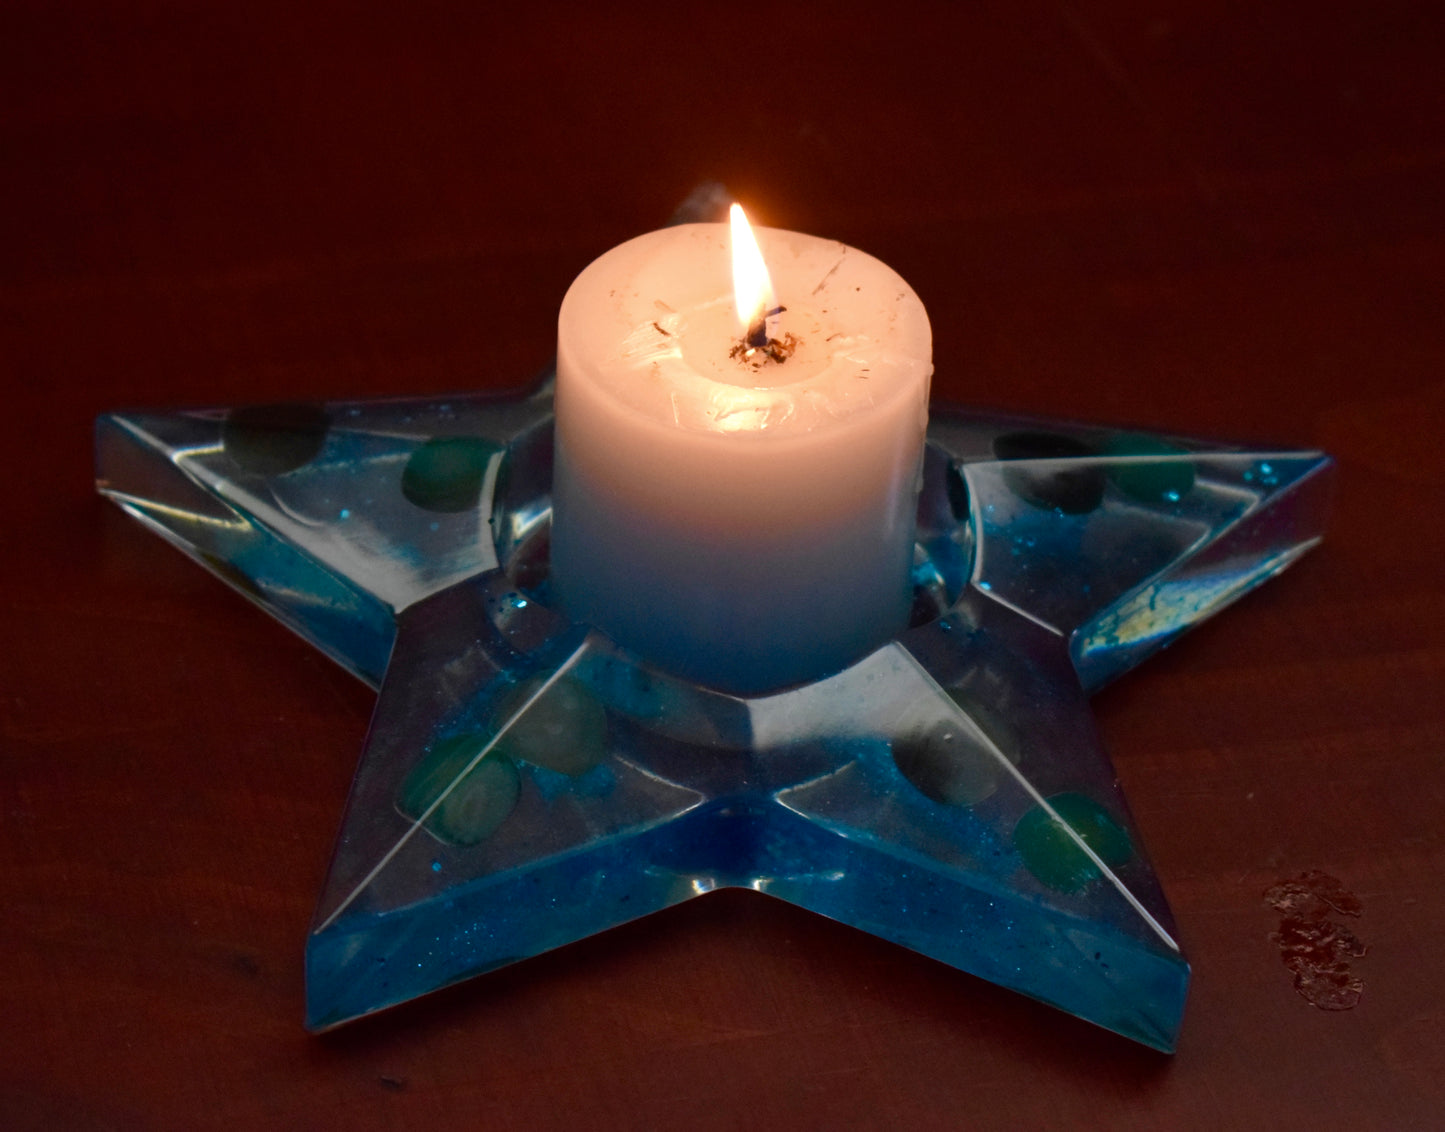 Resin star clock, star candle holder